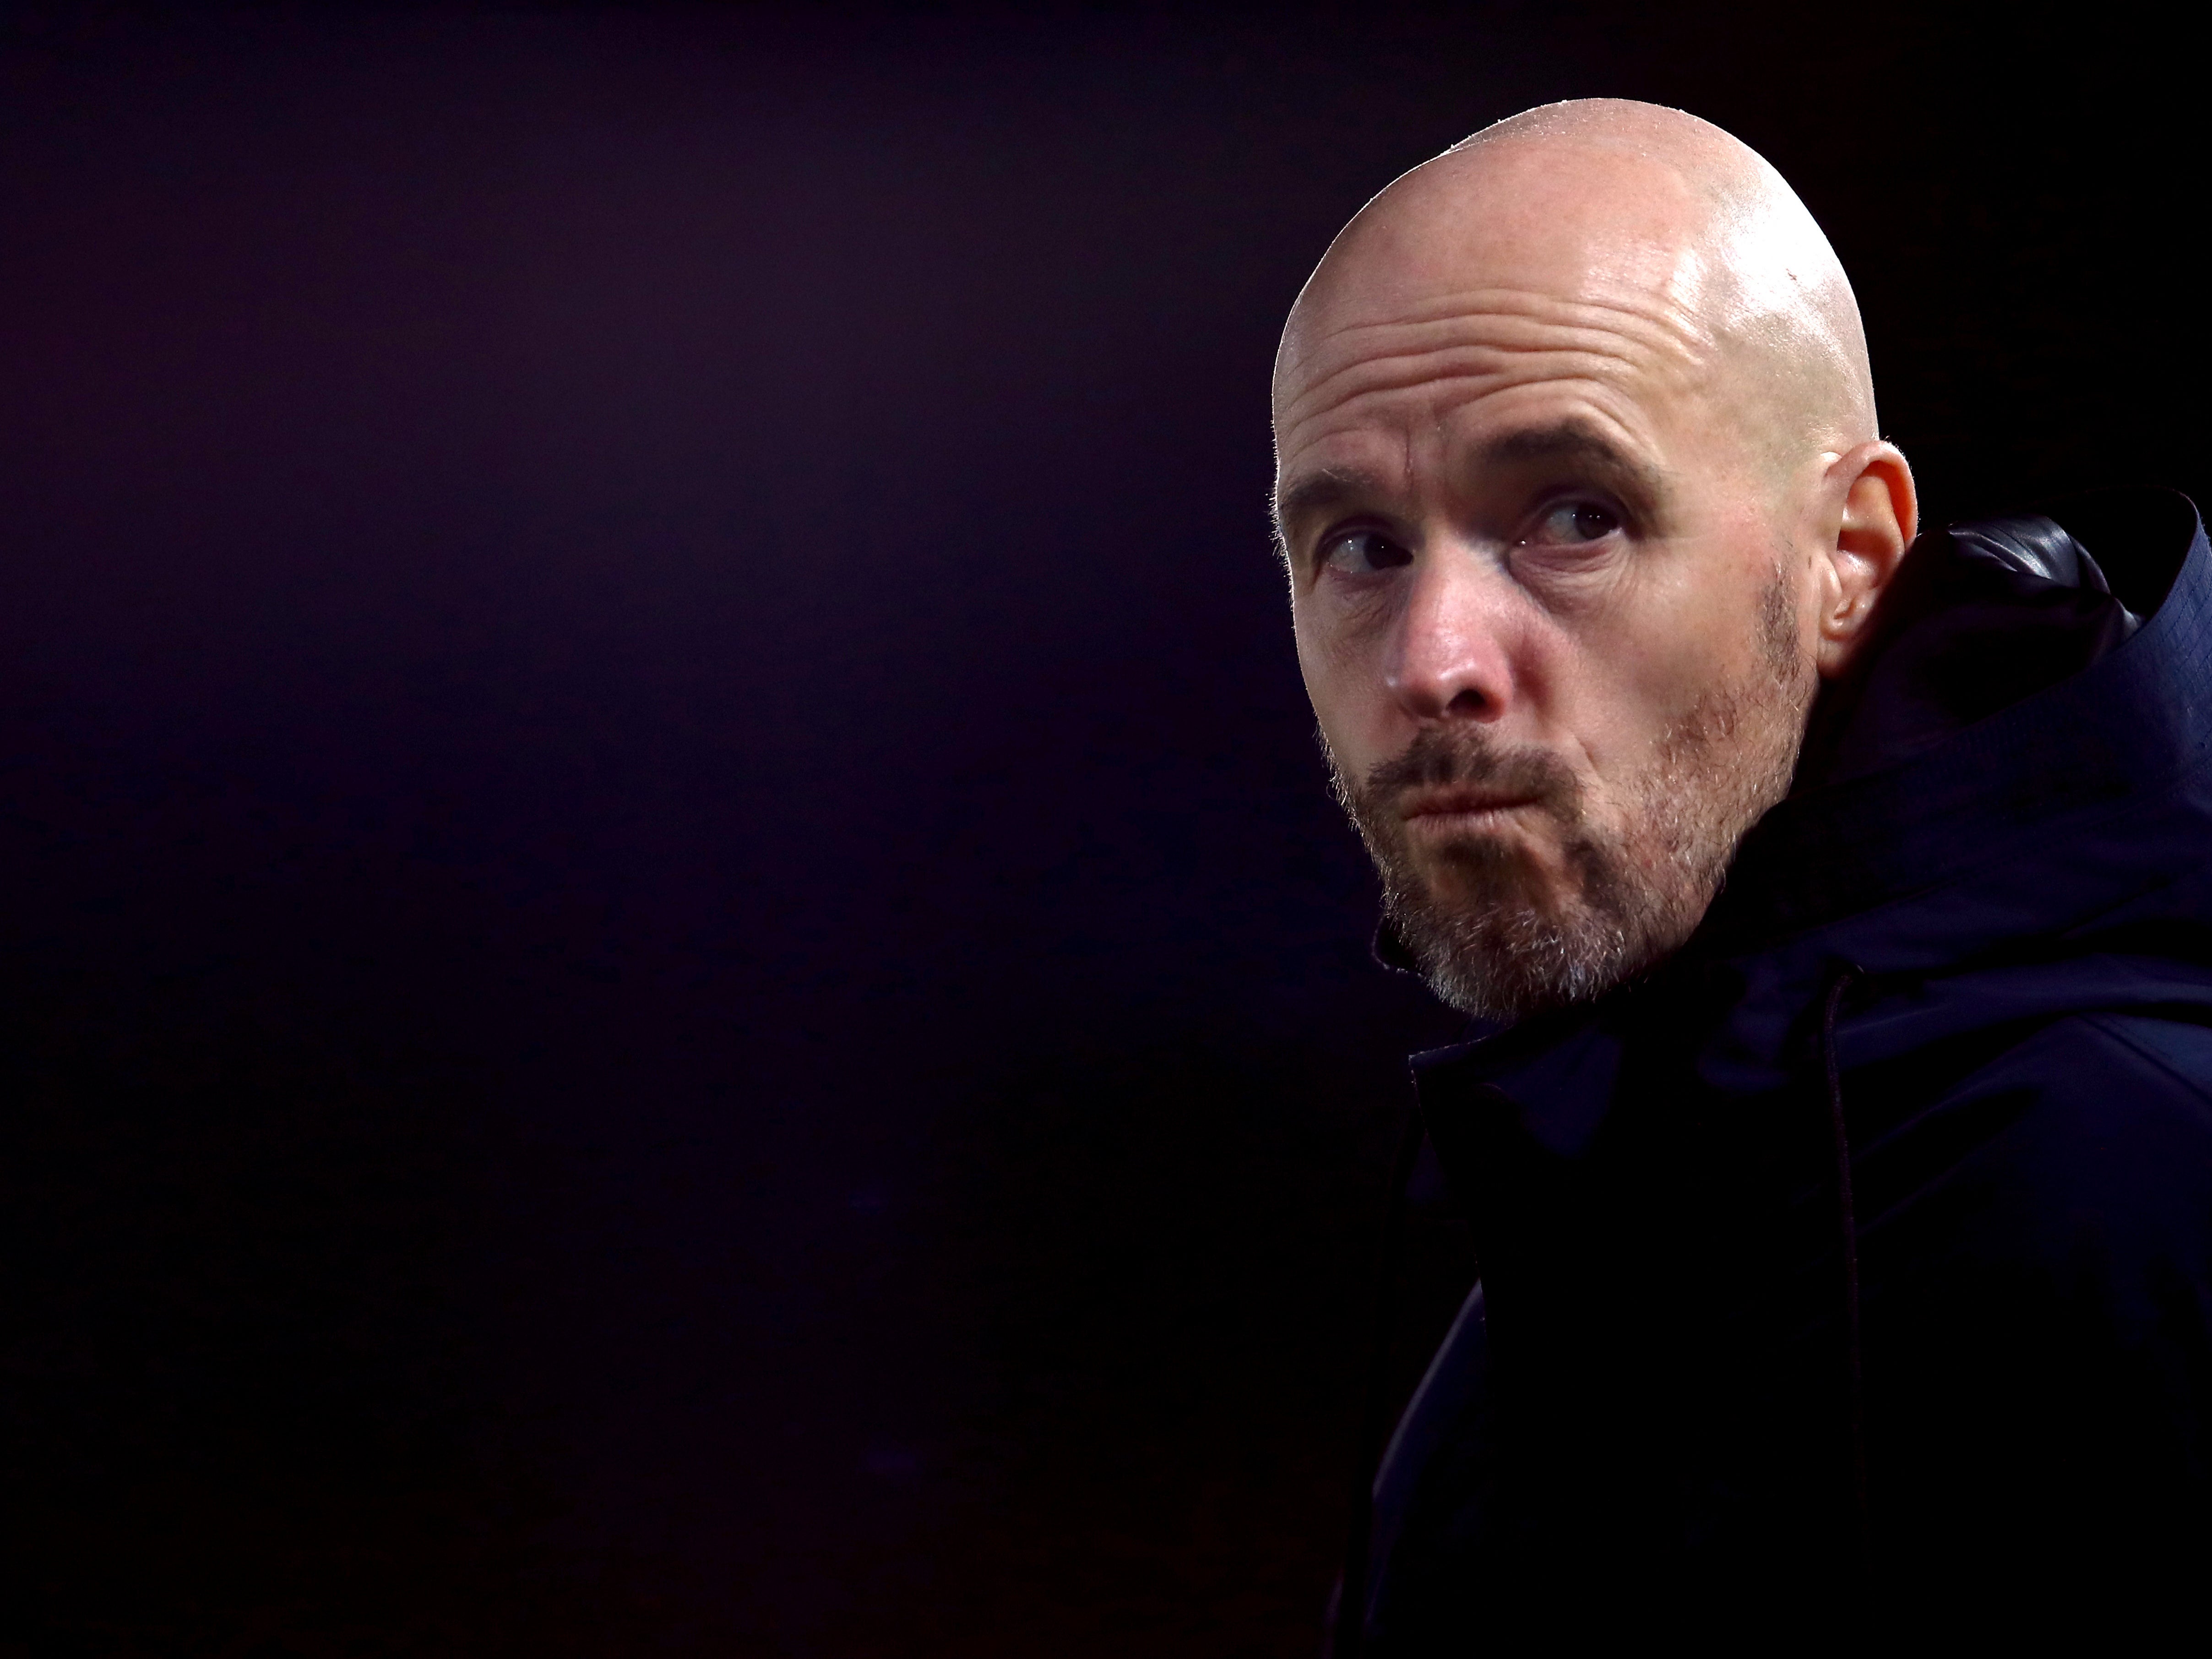 Ajax head coach Erik ten Hag is on the verge of joining Manchester United